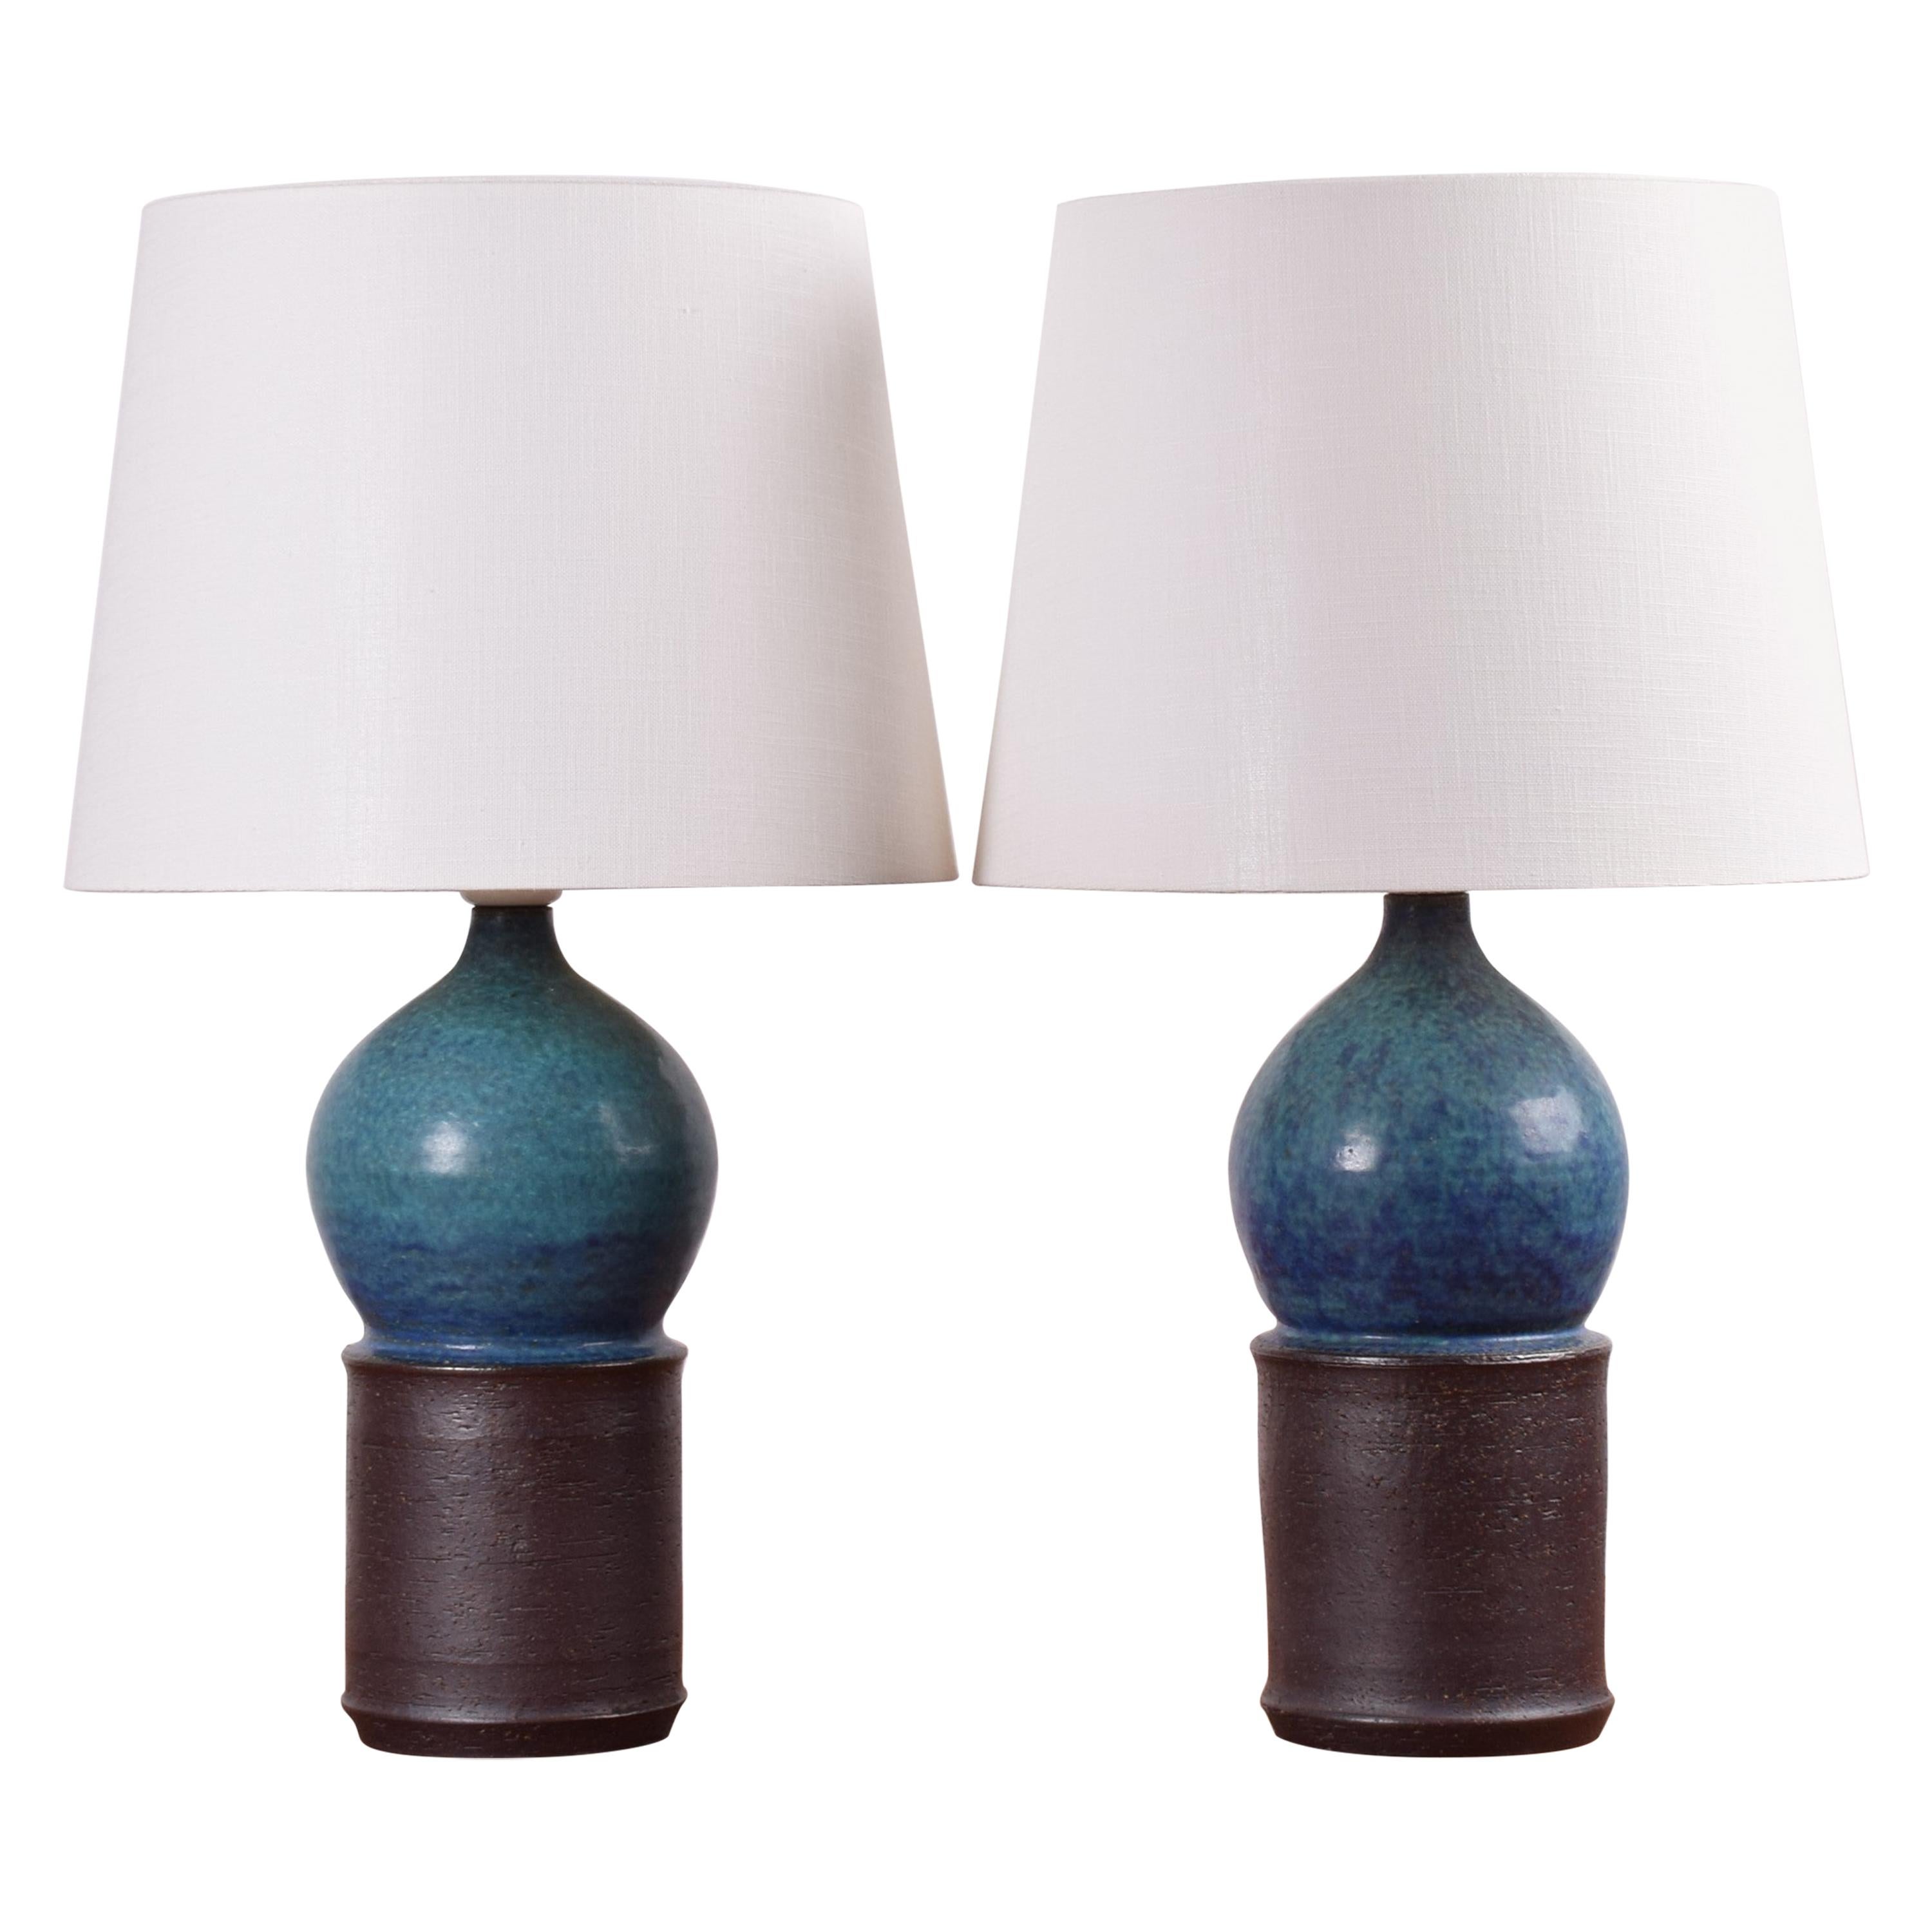 Danish Modern Marianne Starck Pair of Sculptural Turquoise and Brown Table Lamps